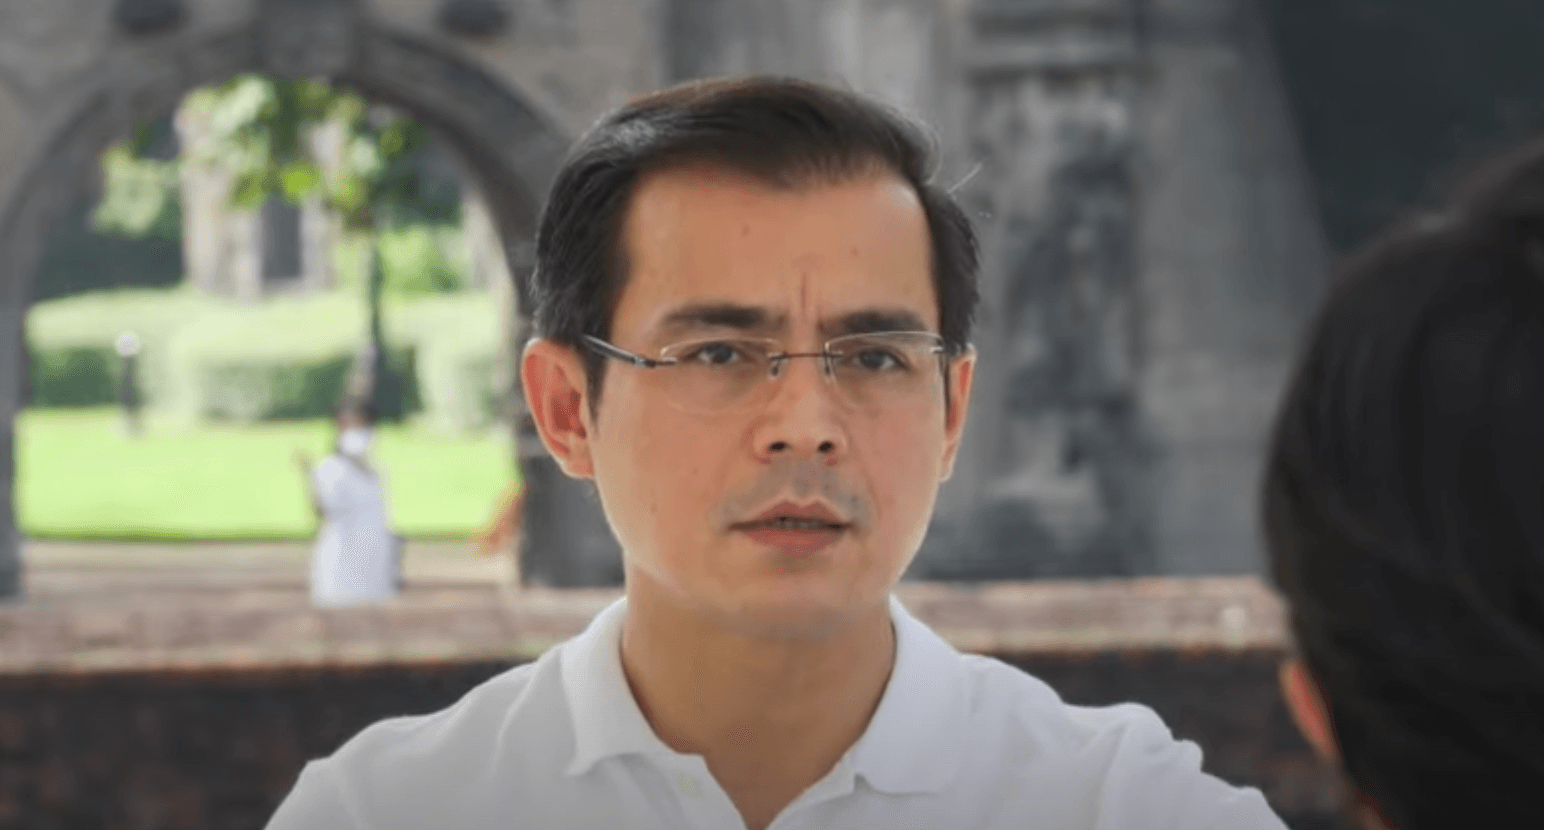 Isko’s COVID-19 plan: Boost healthcare system while opening economy